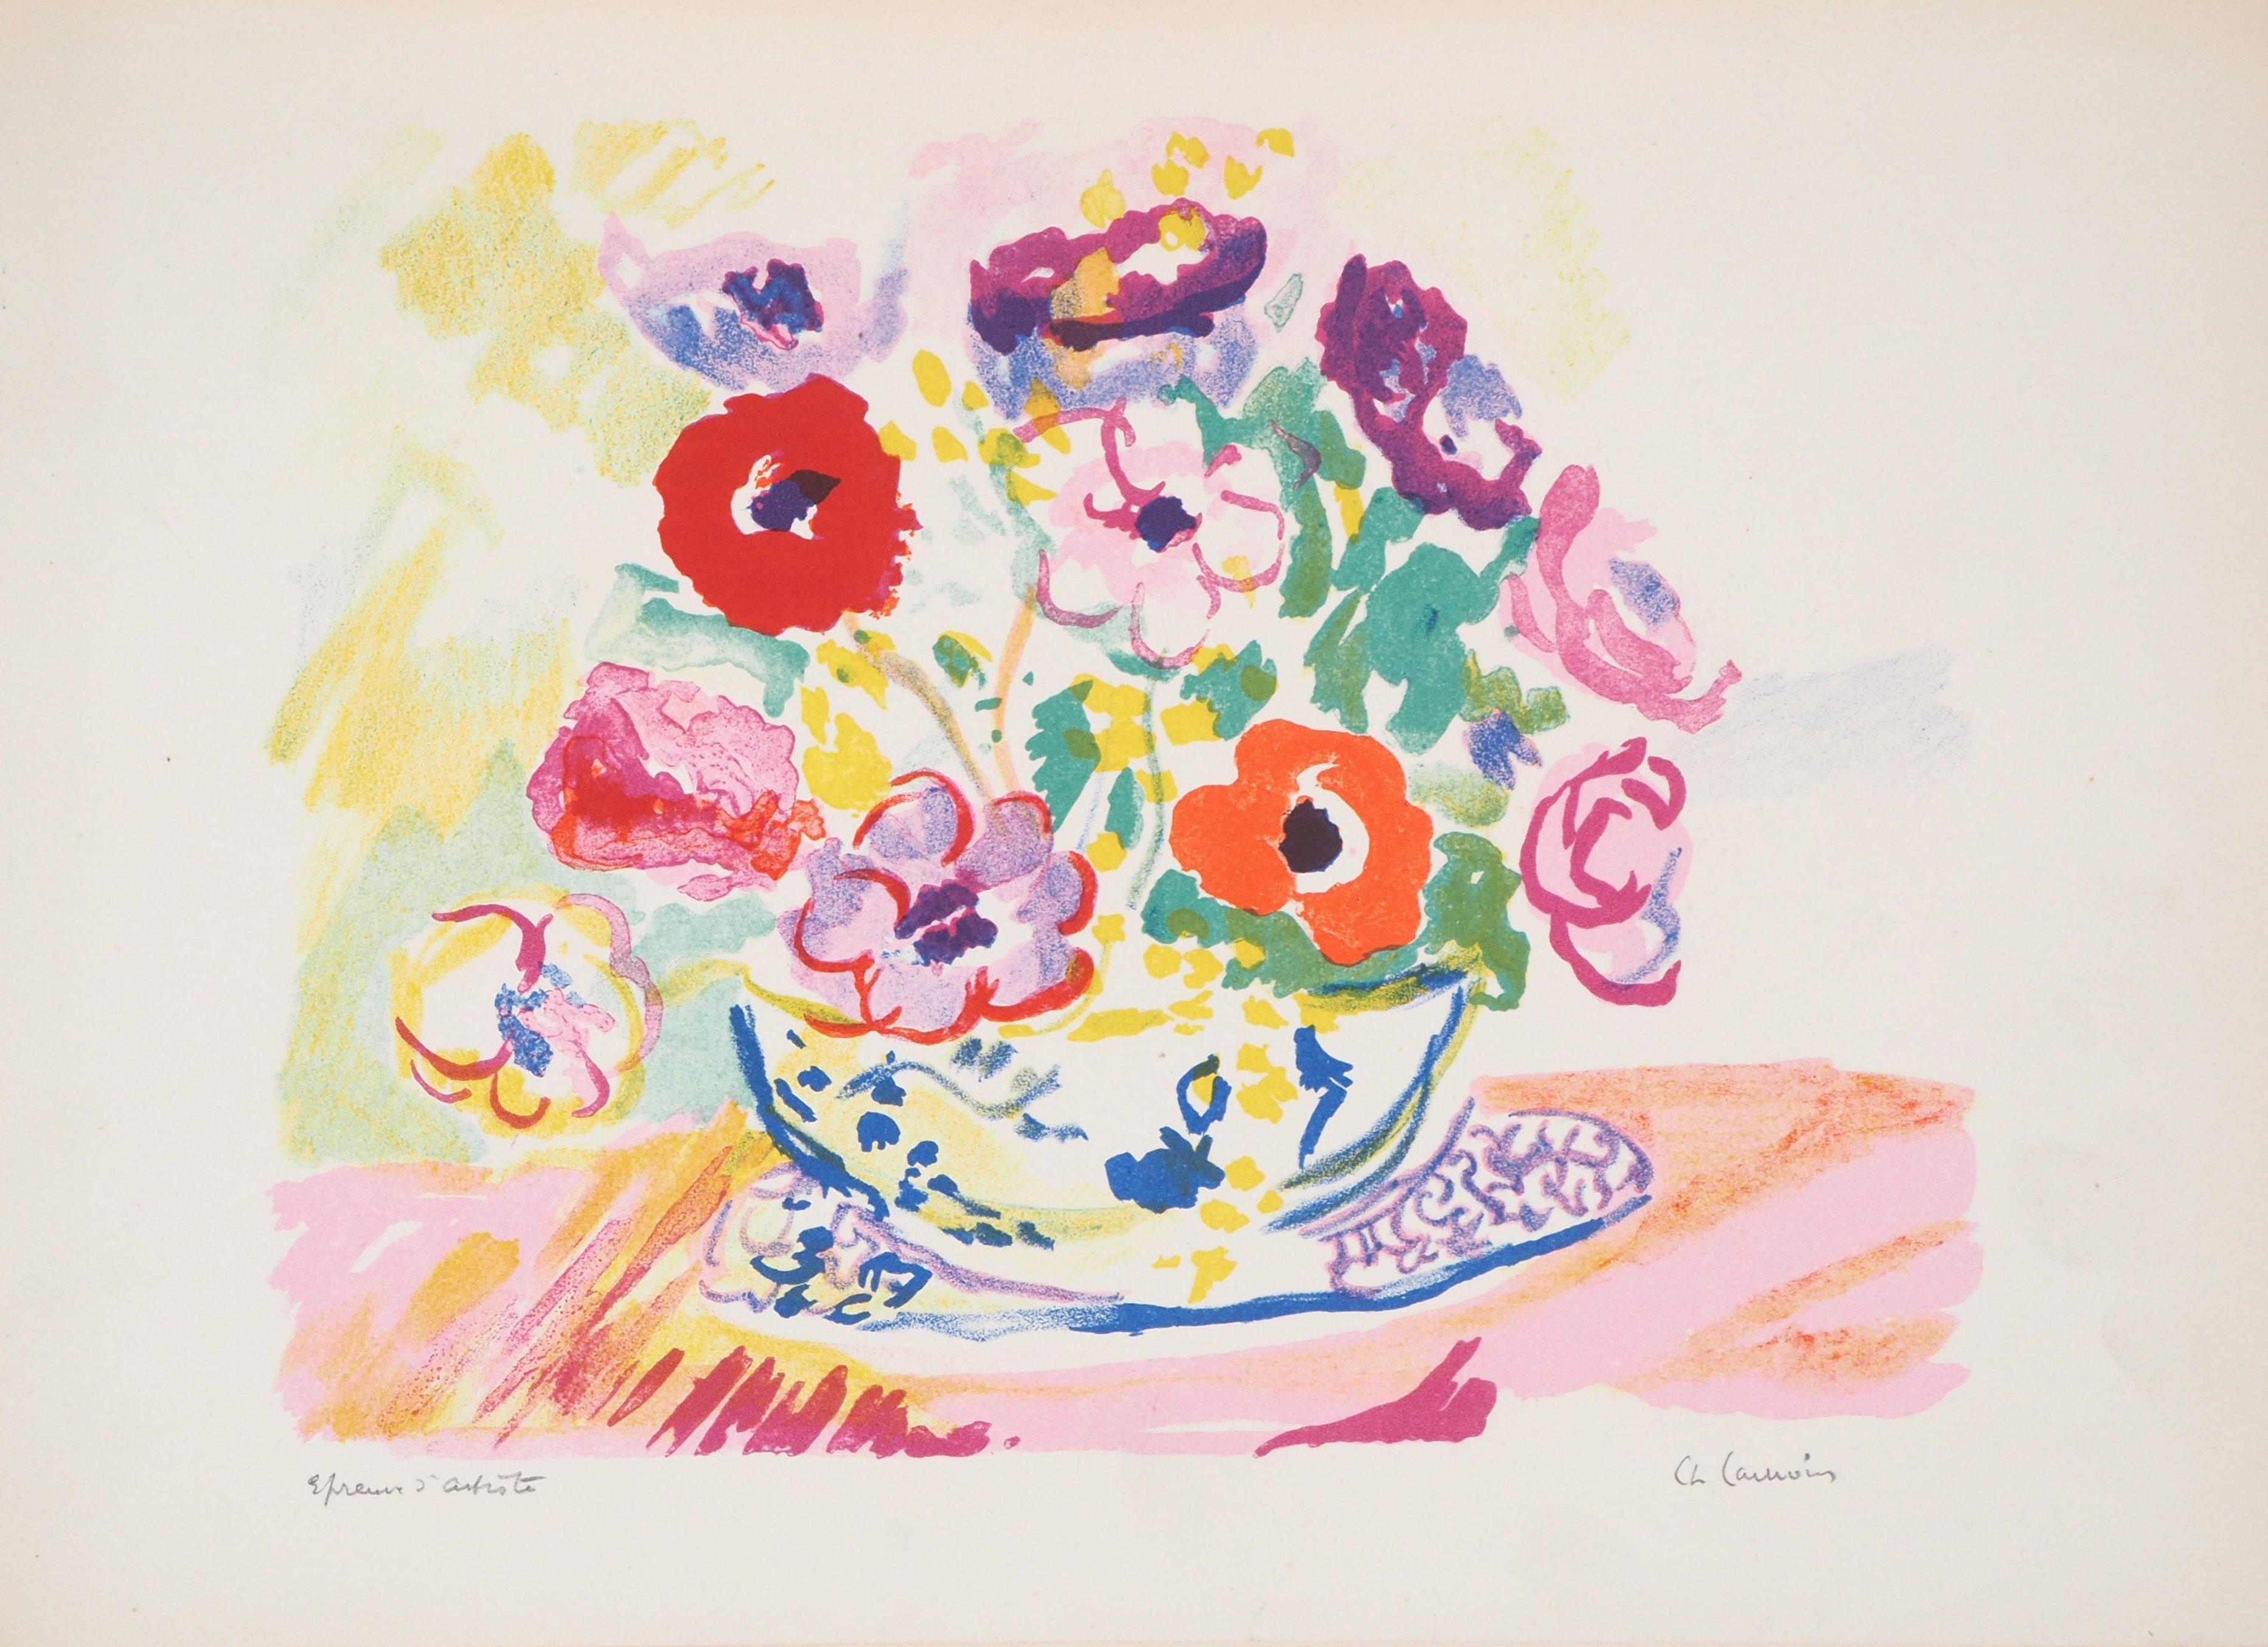 Charles Camoin Interior Print - Colorful Bouquet - Original Lithograph - Signed